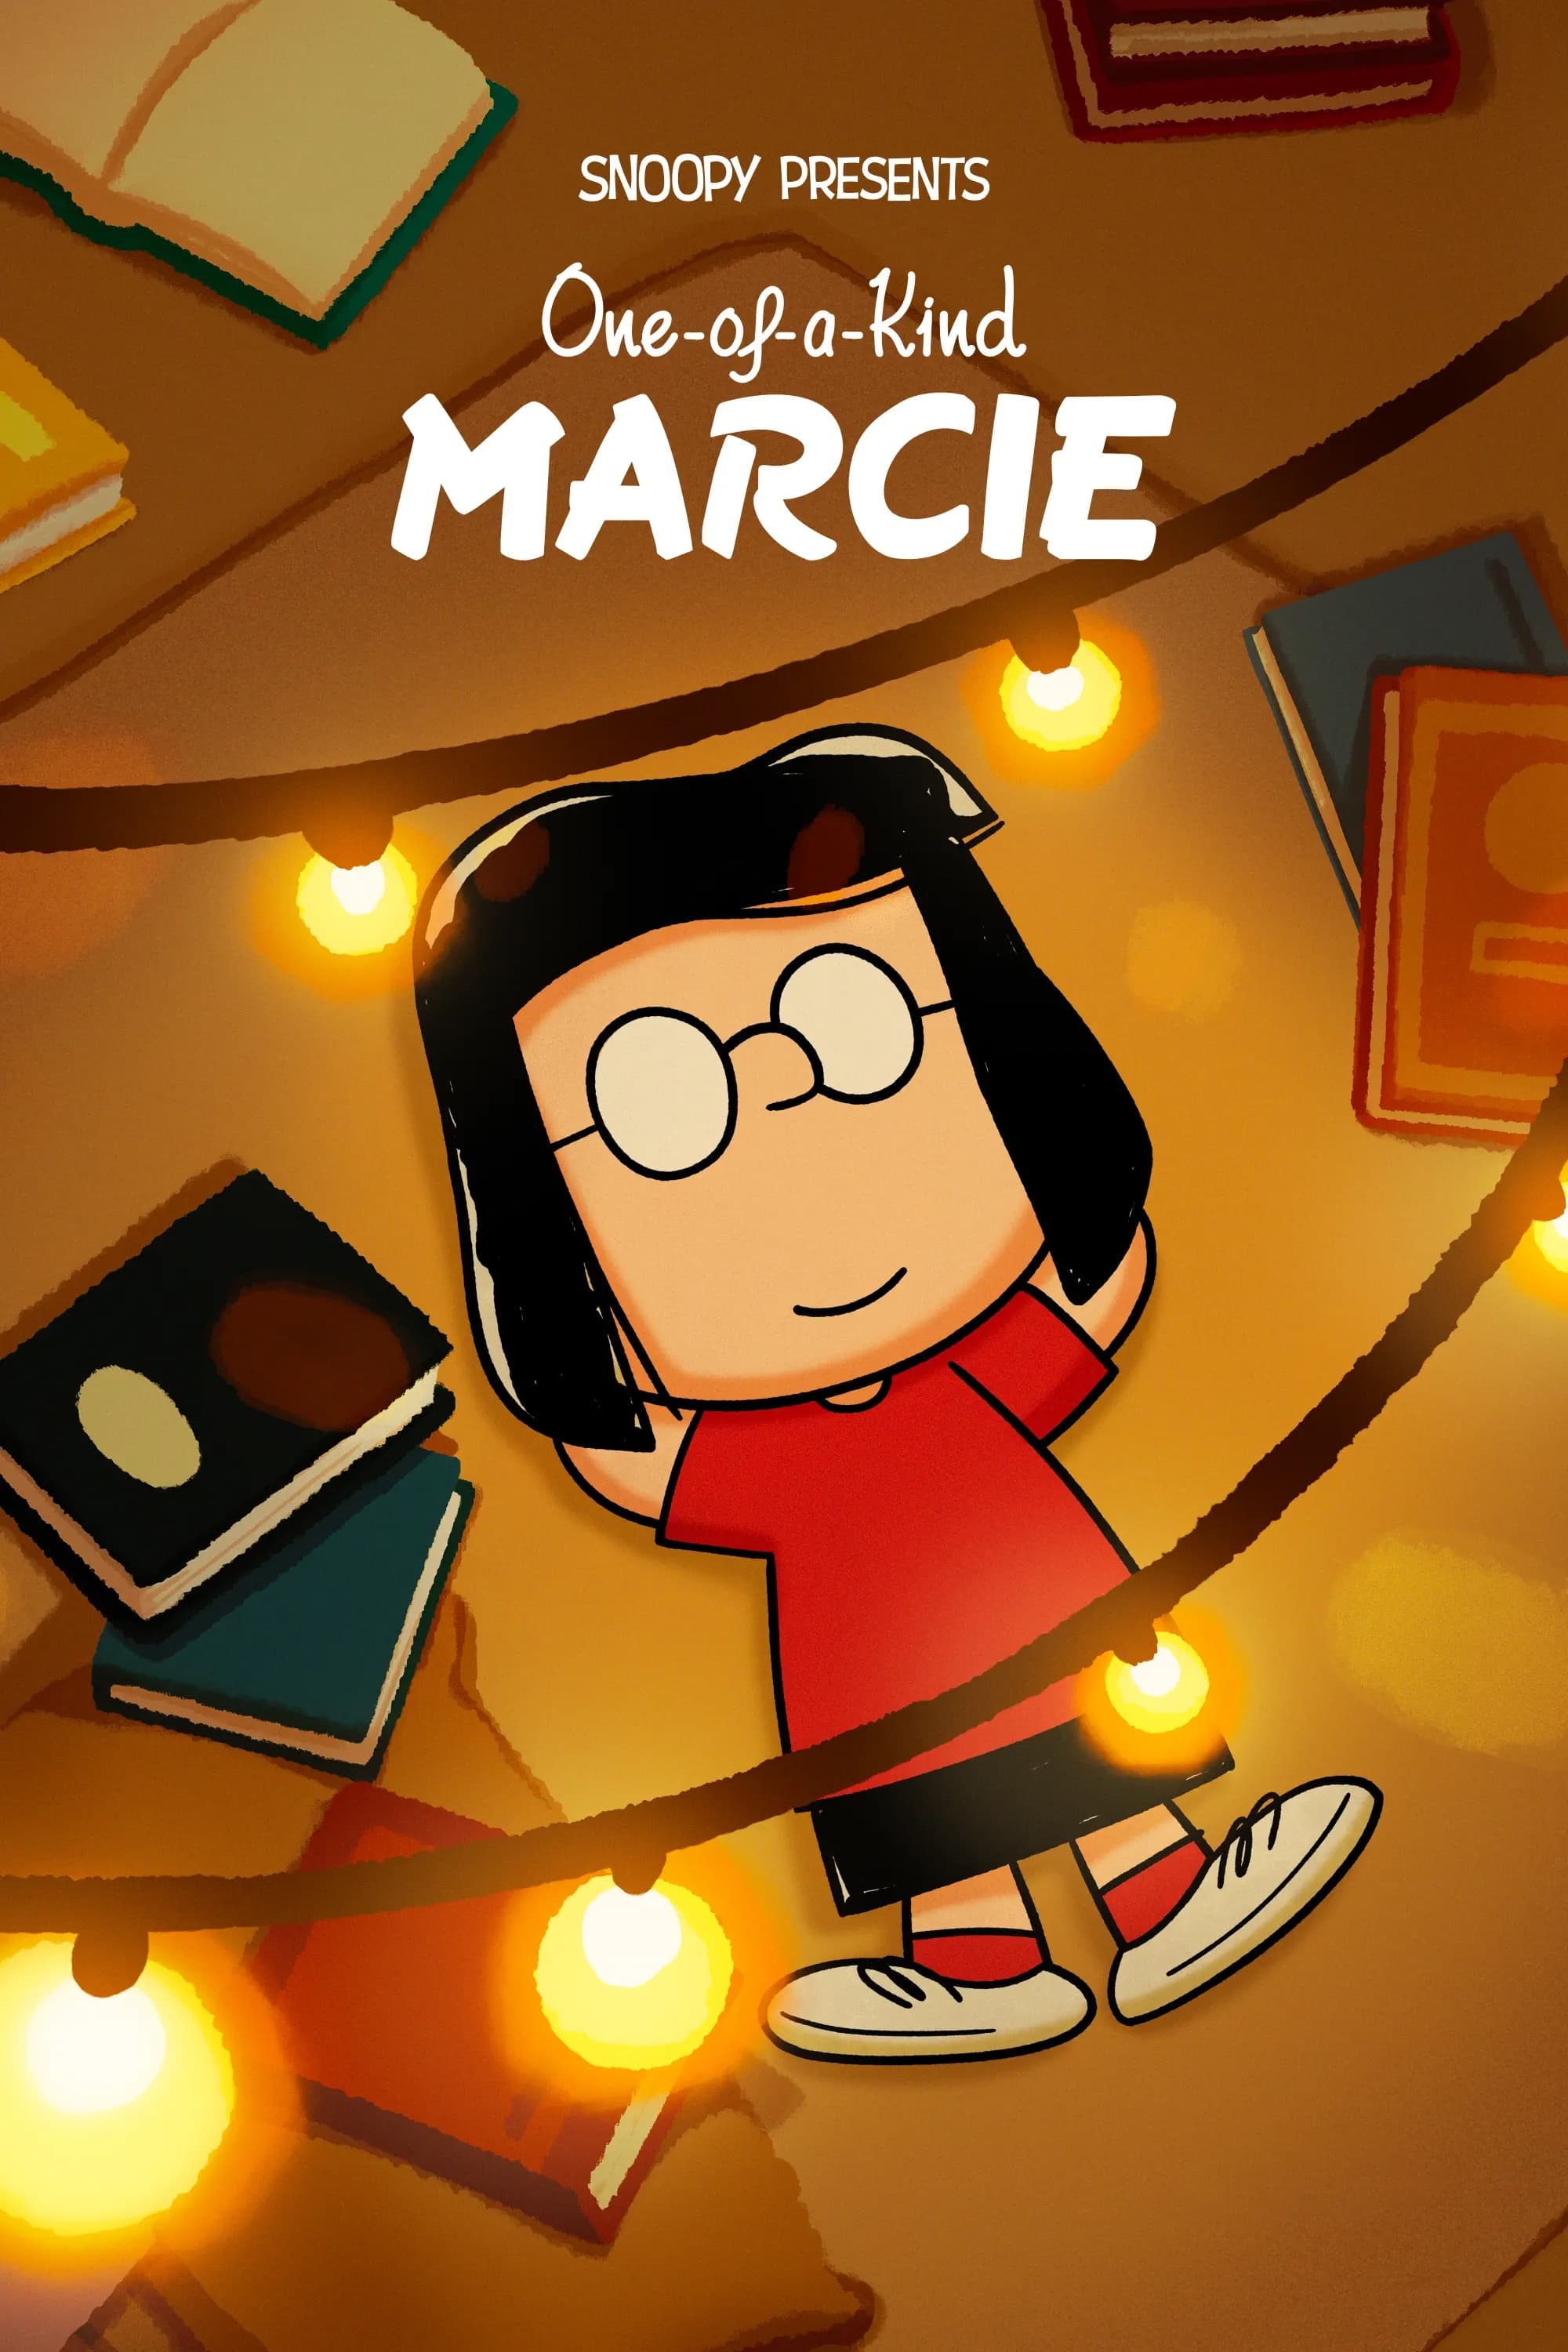 Snoopy Presents: One of a Kind Marcie